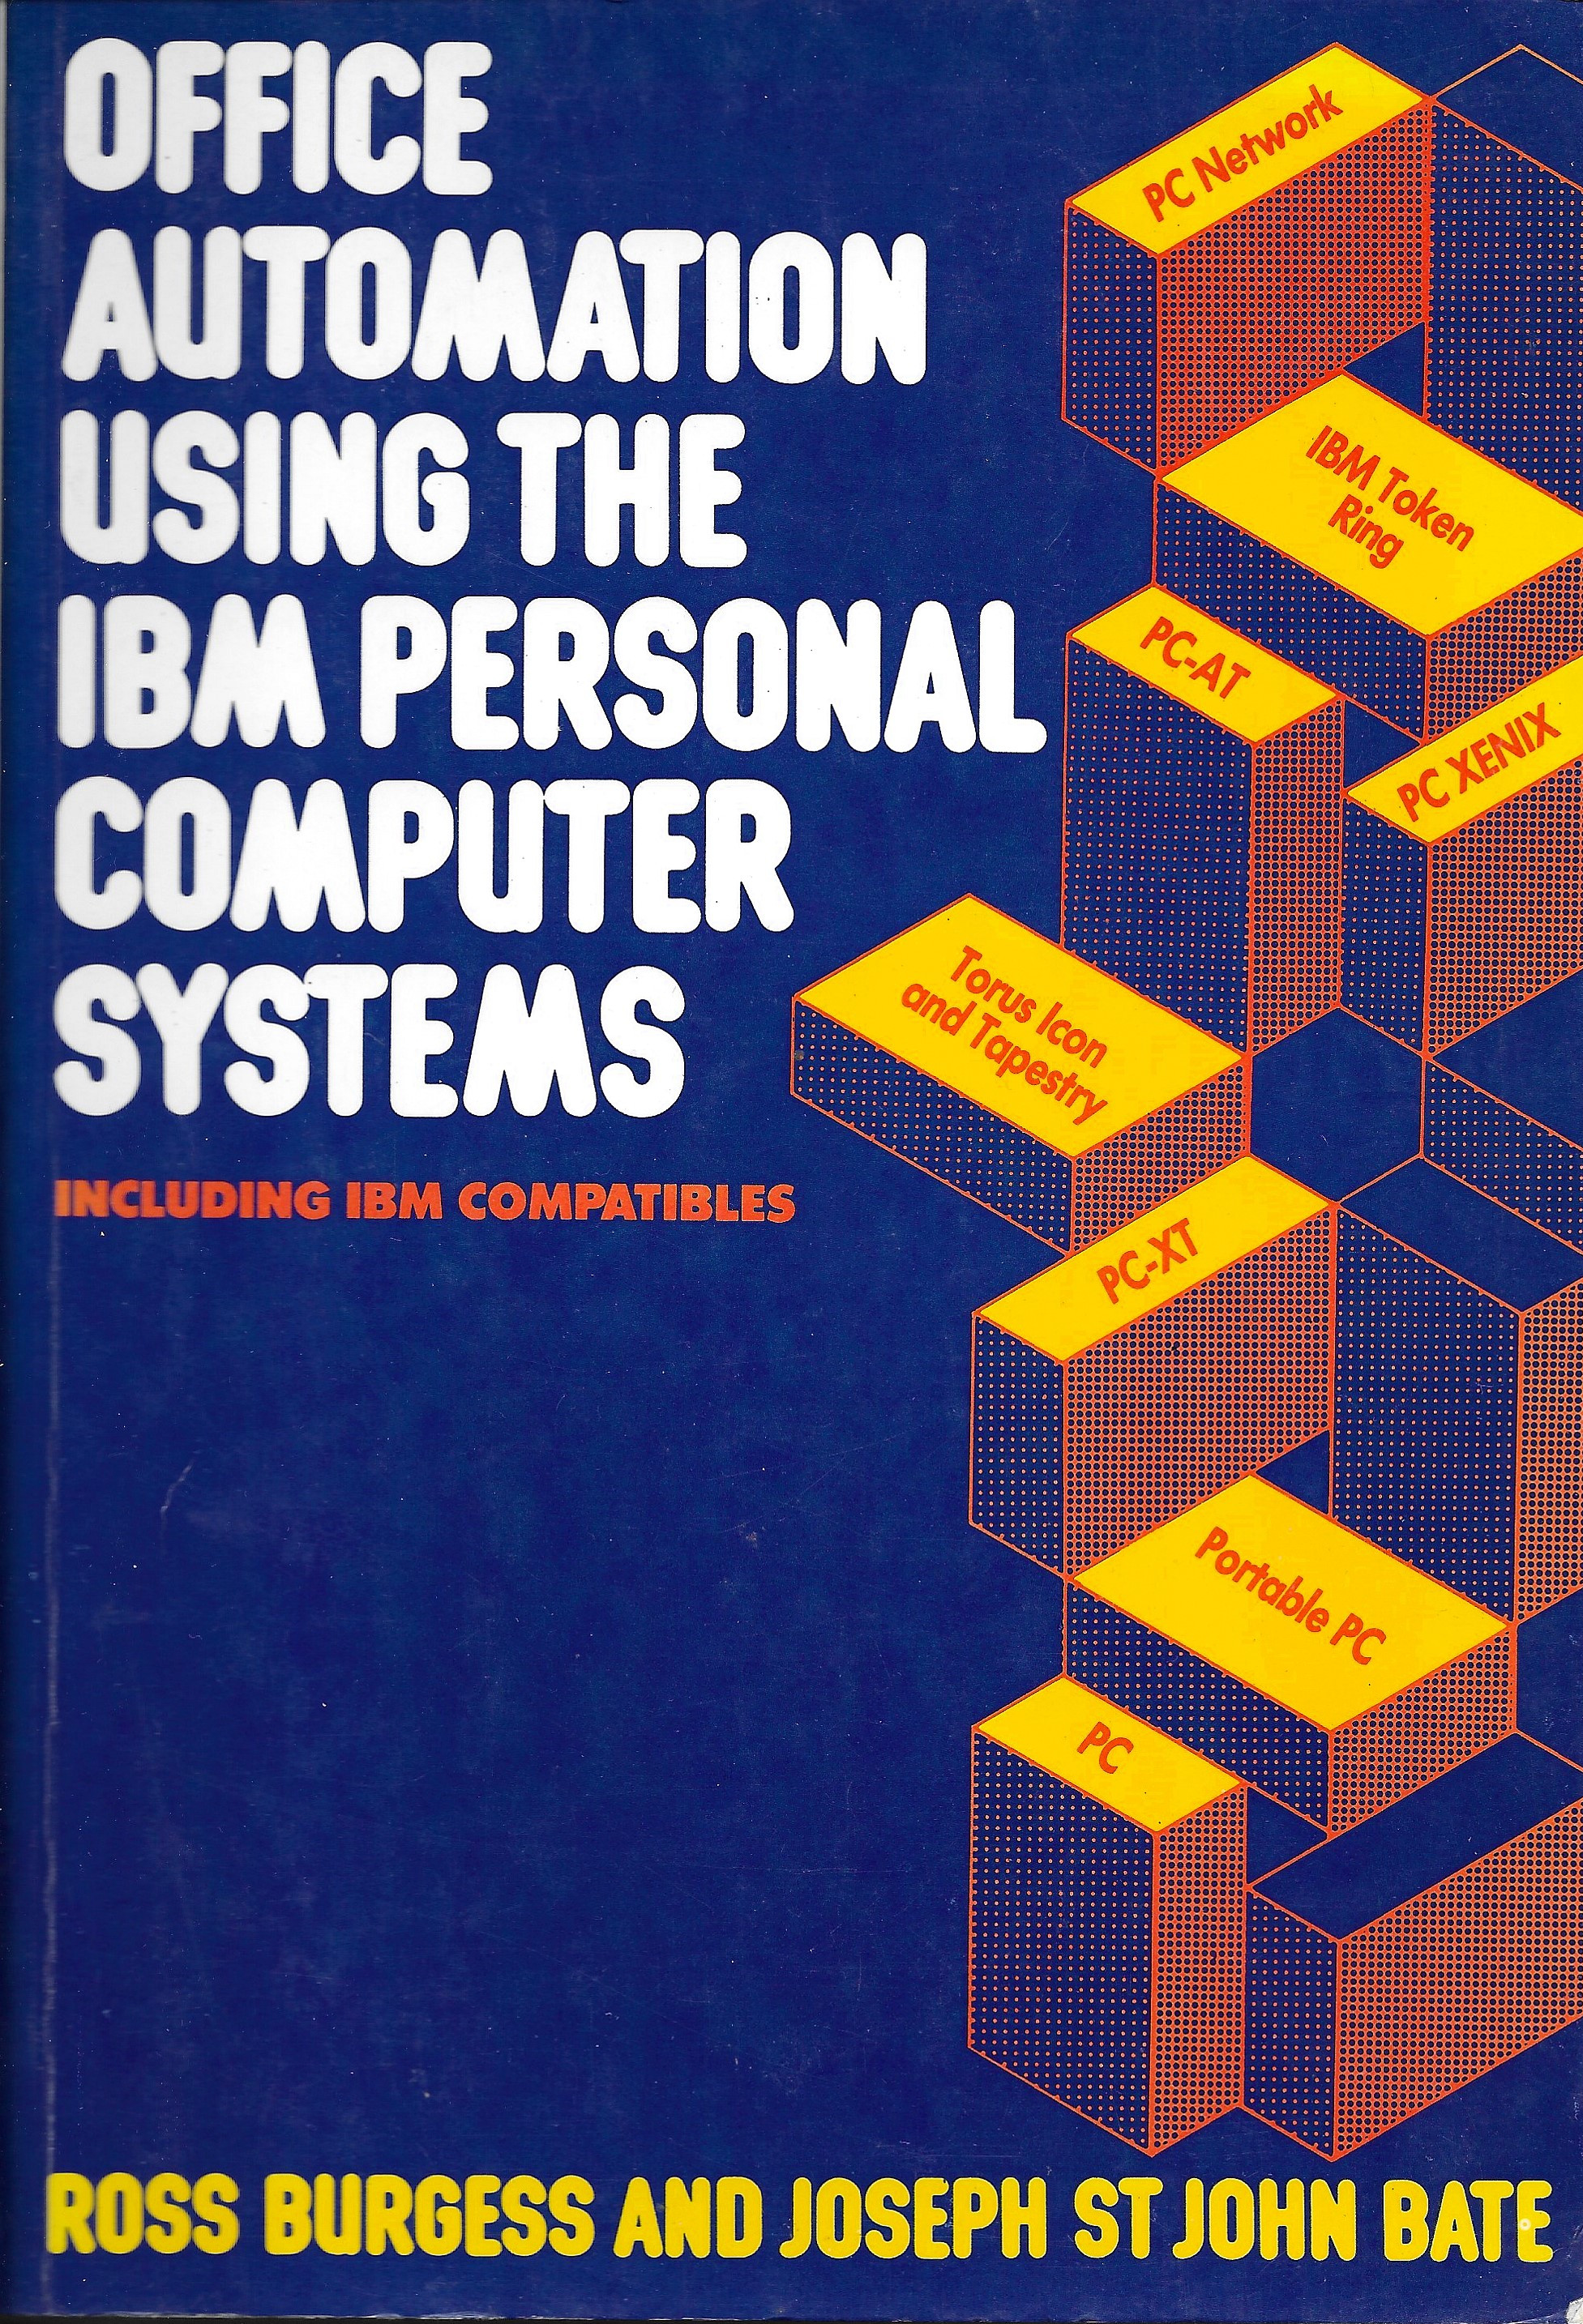 Cover of IBM PC book